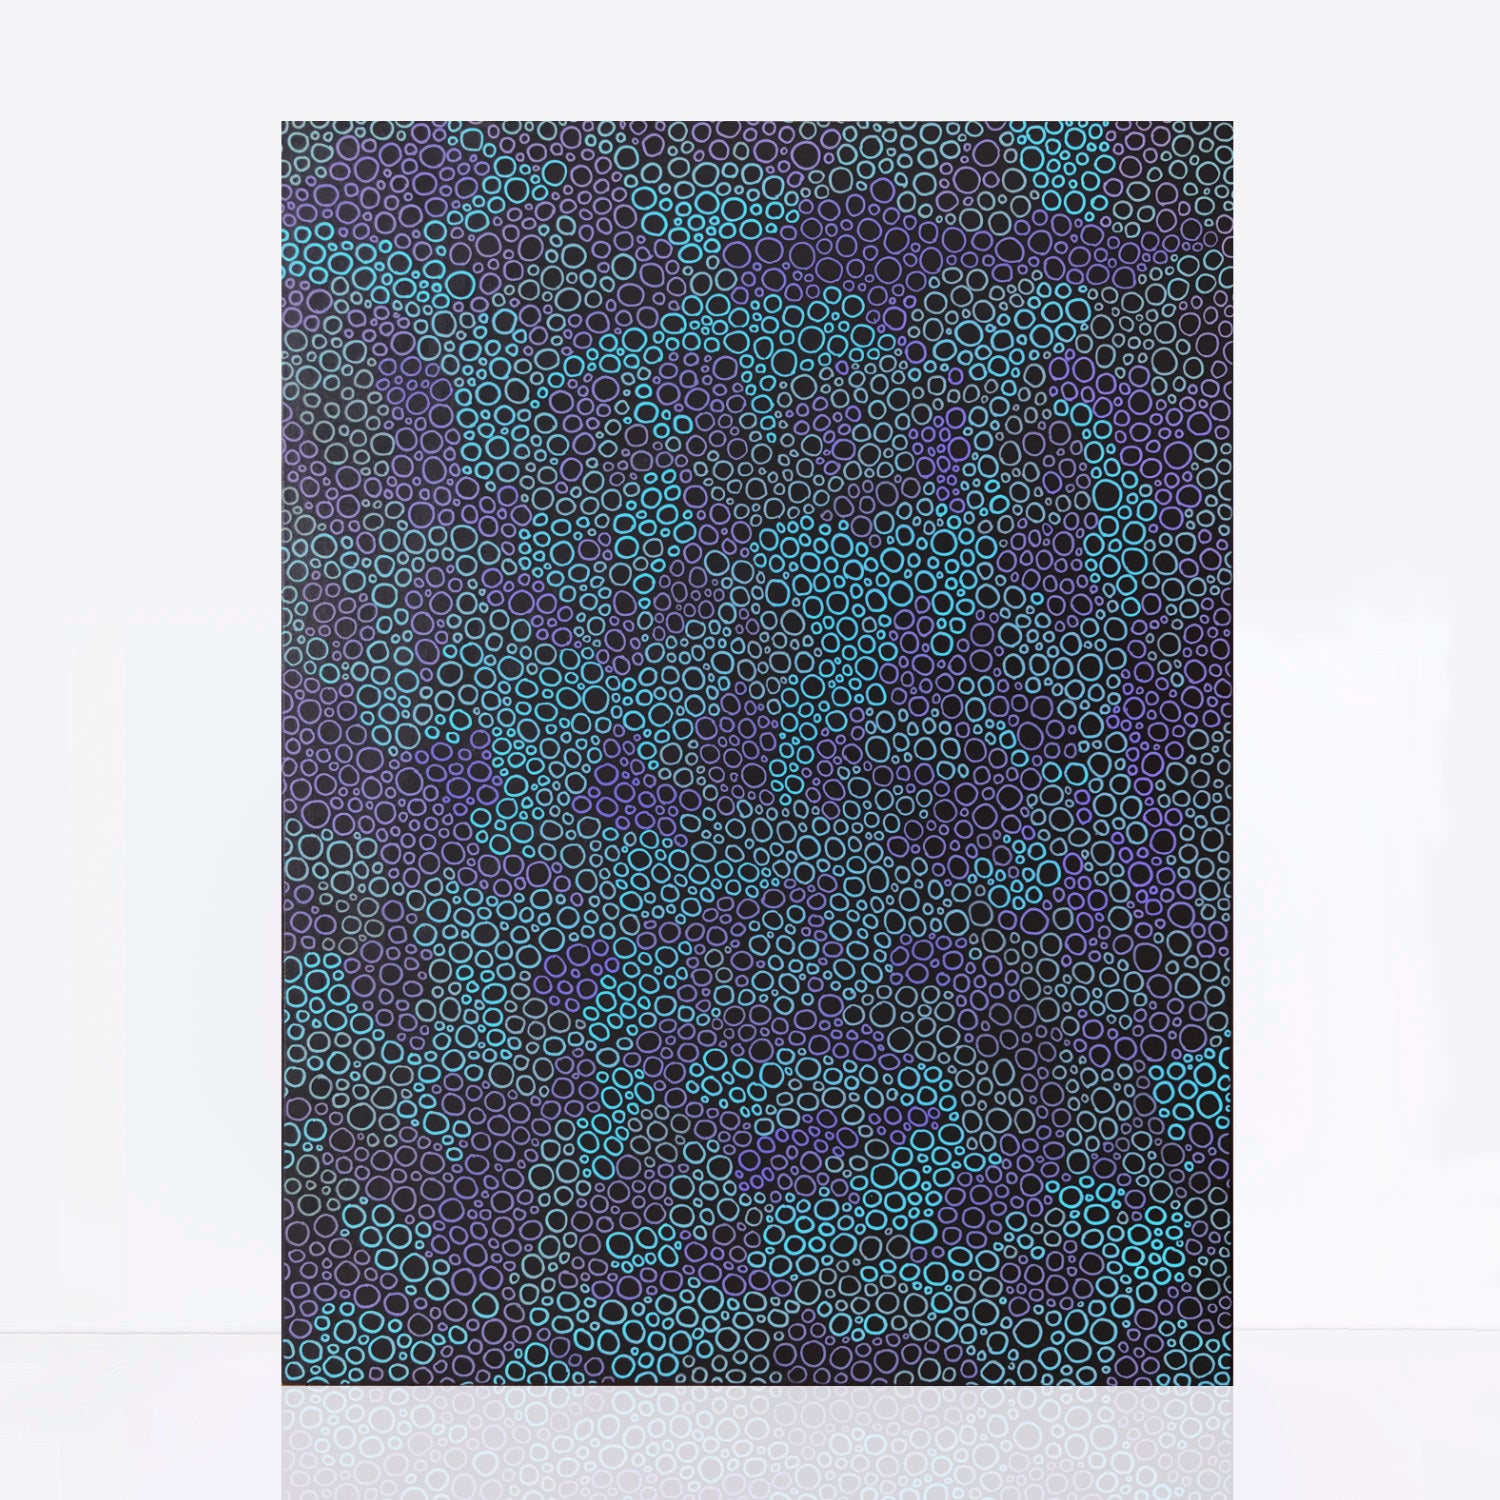  abstract painting with blue and purple detail on black